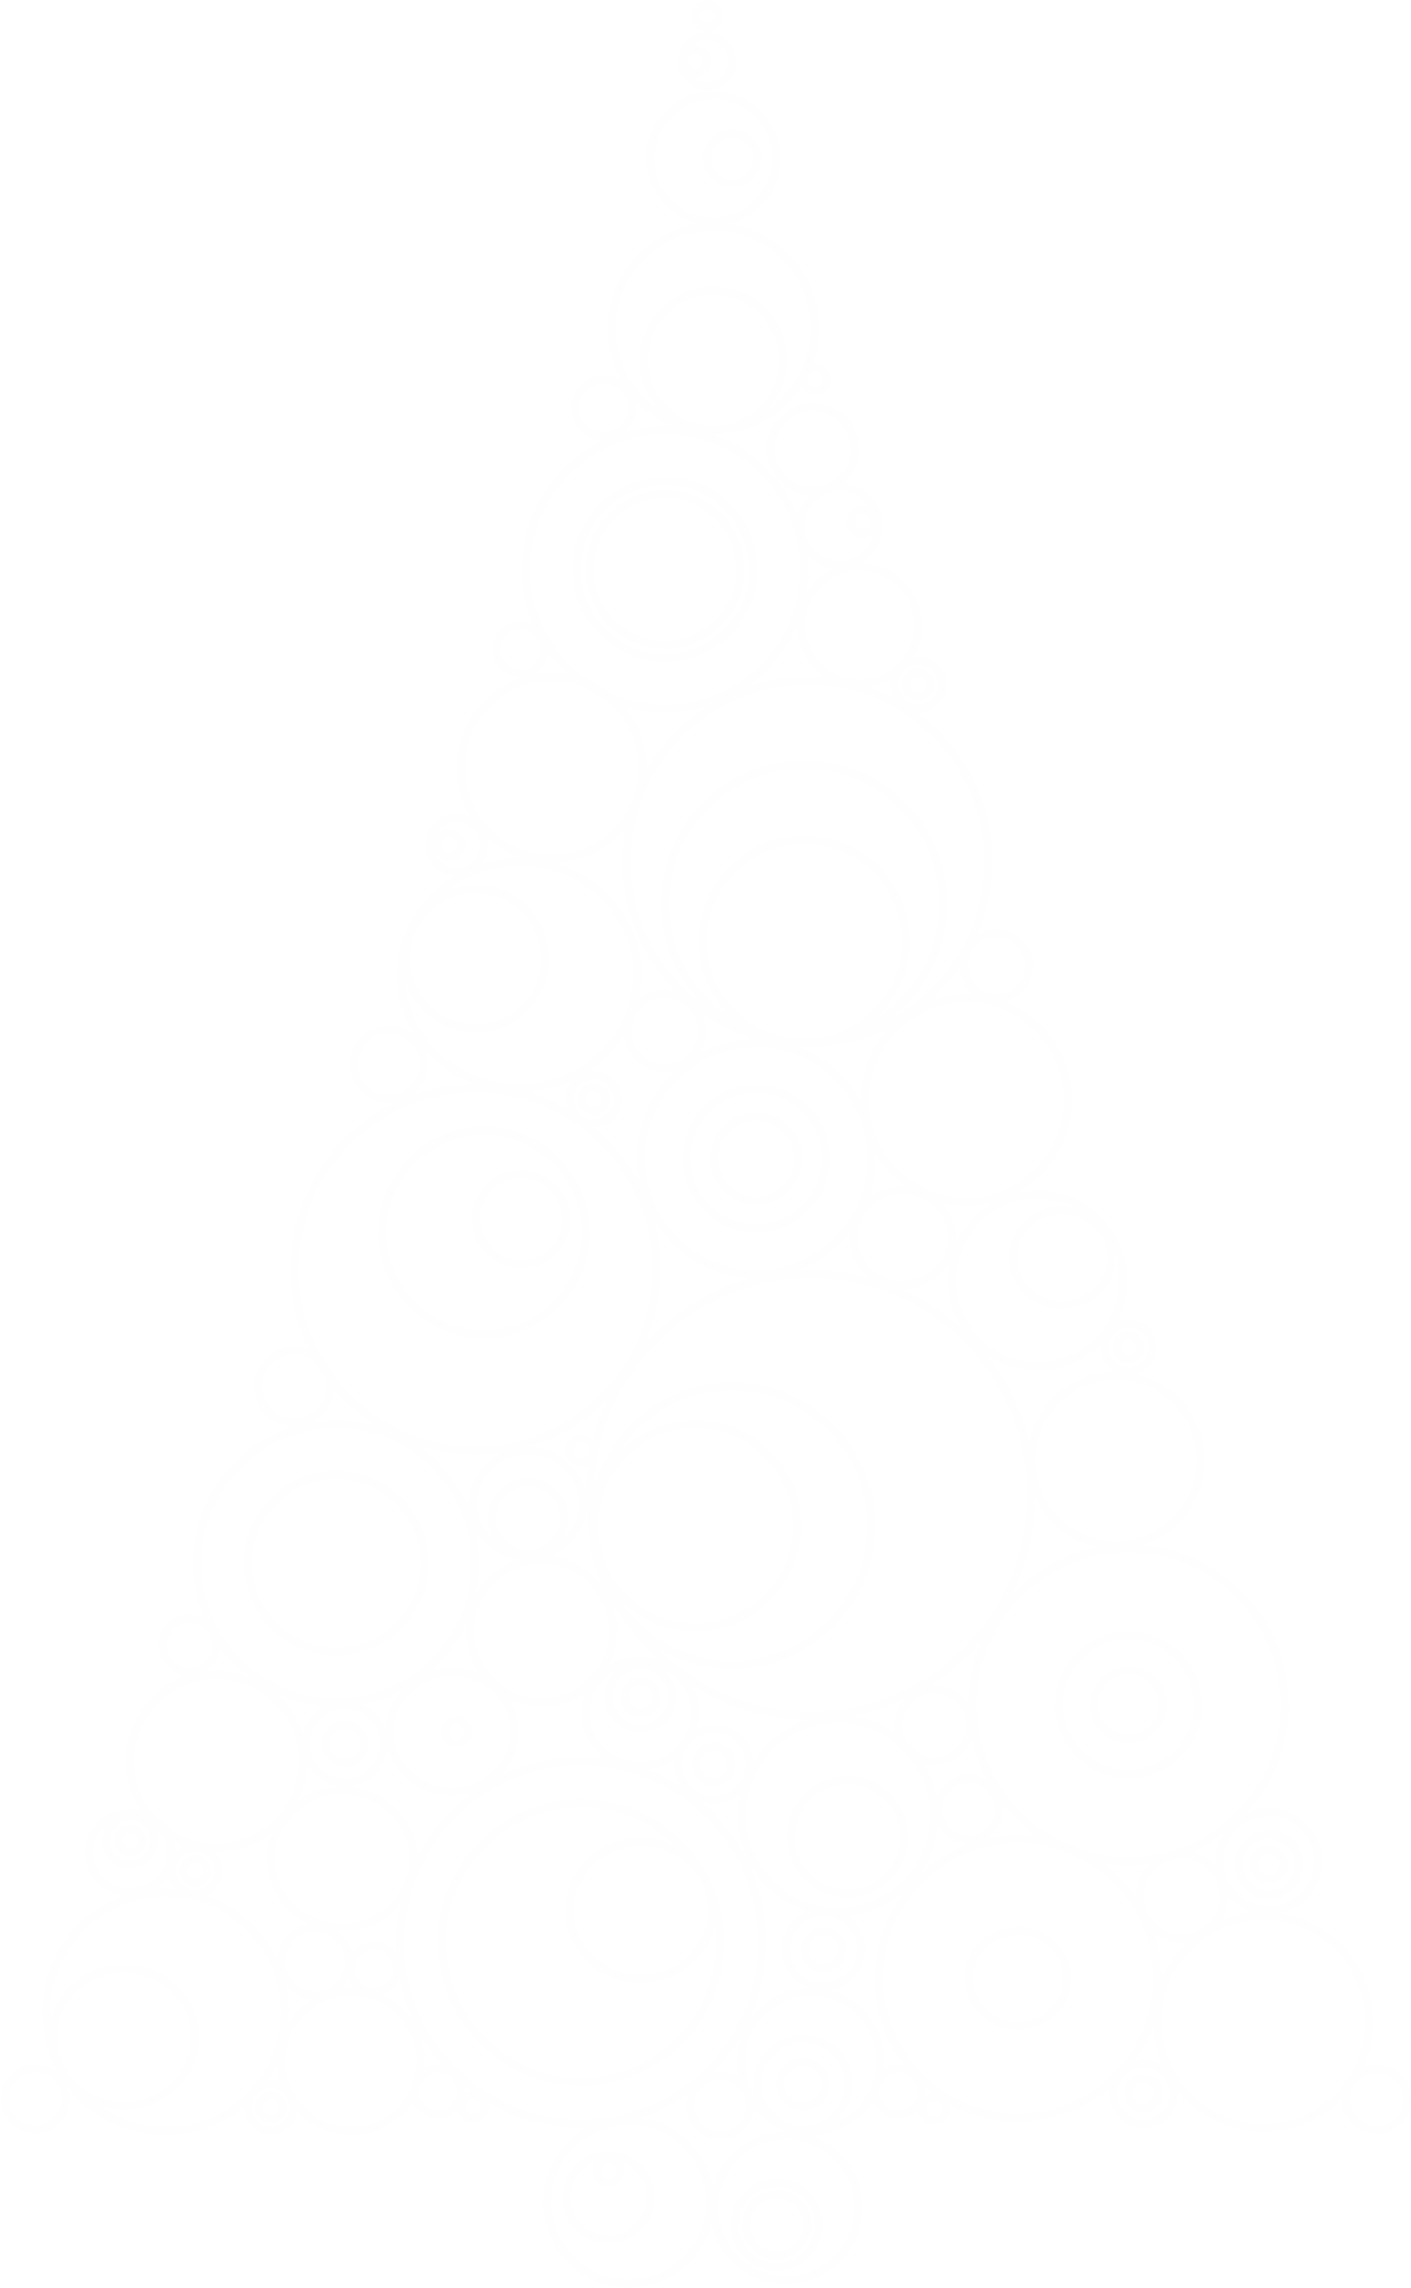 Abstract Circles Christmas Tree With No Background By Gdj